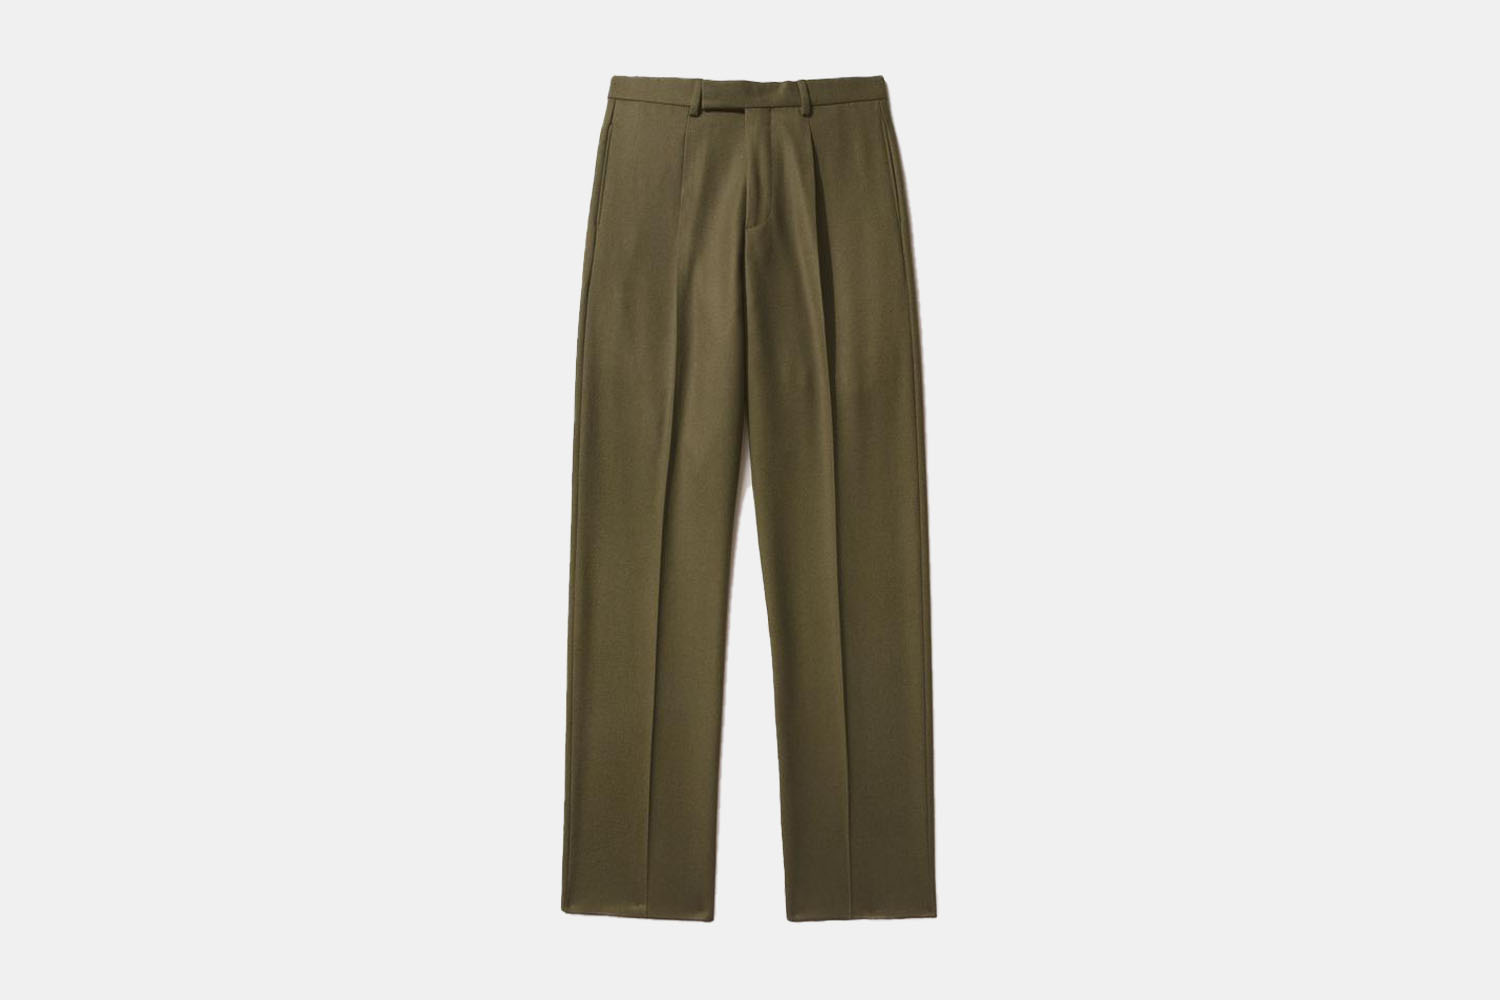 a pair of olive green, single pleated trousers.